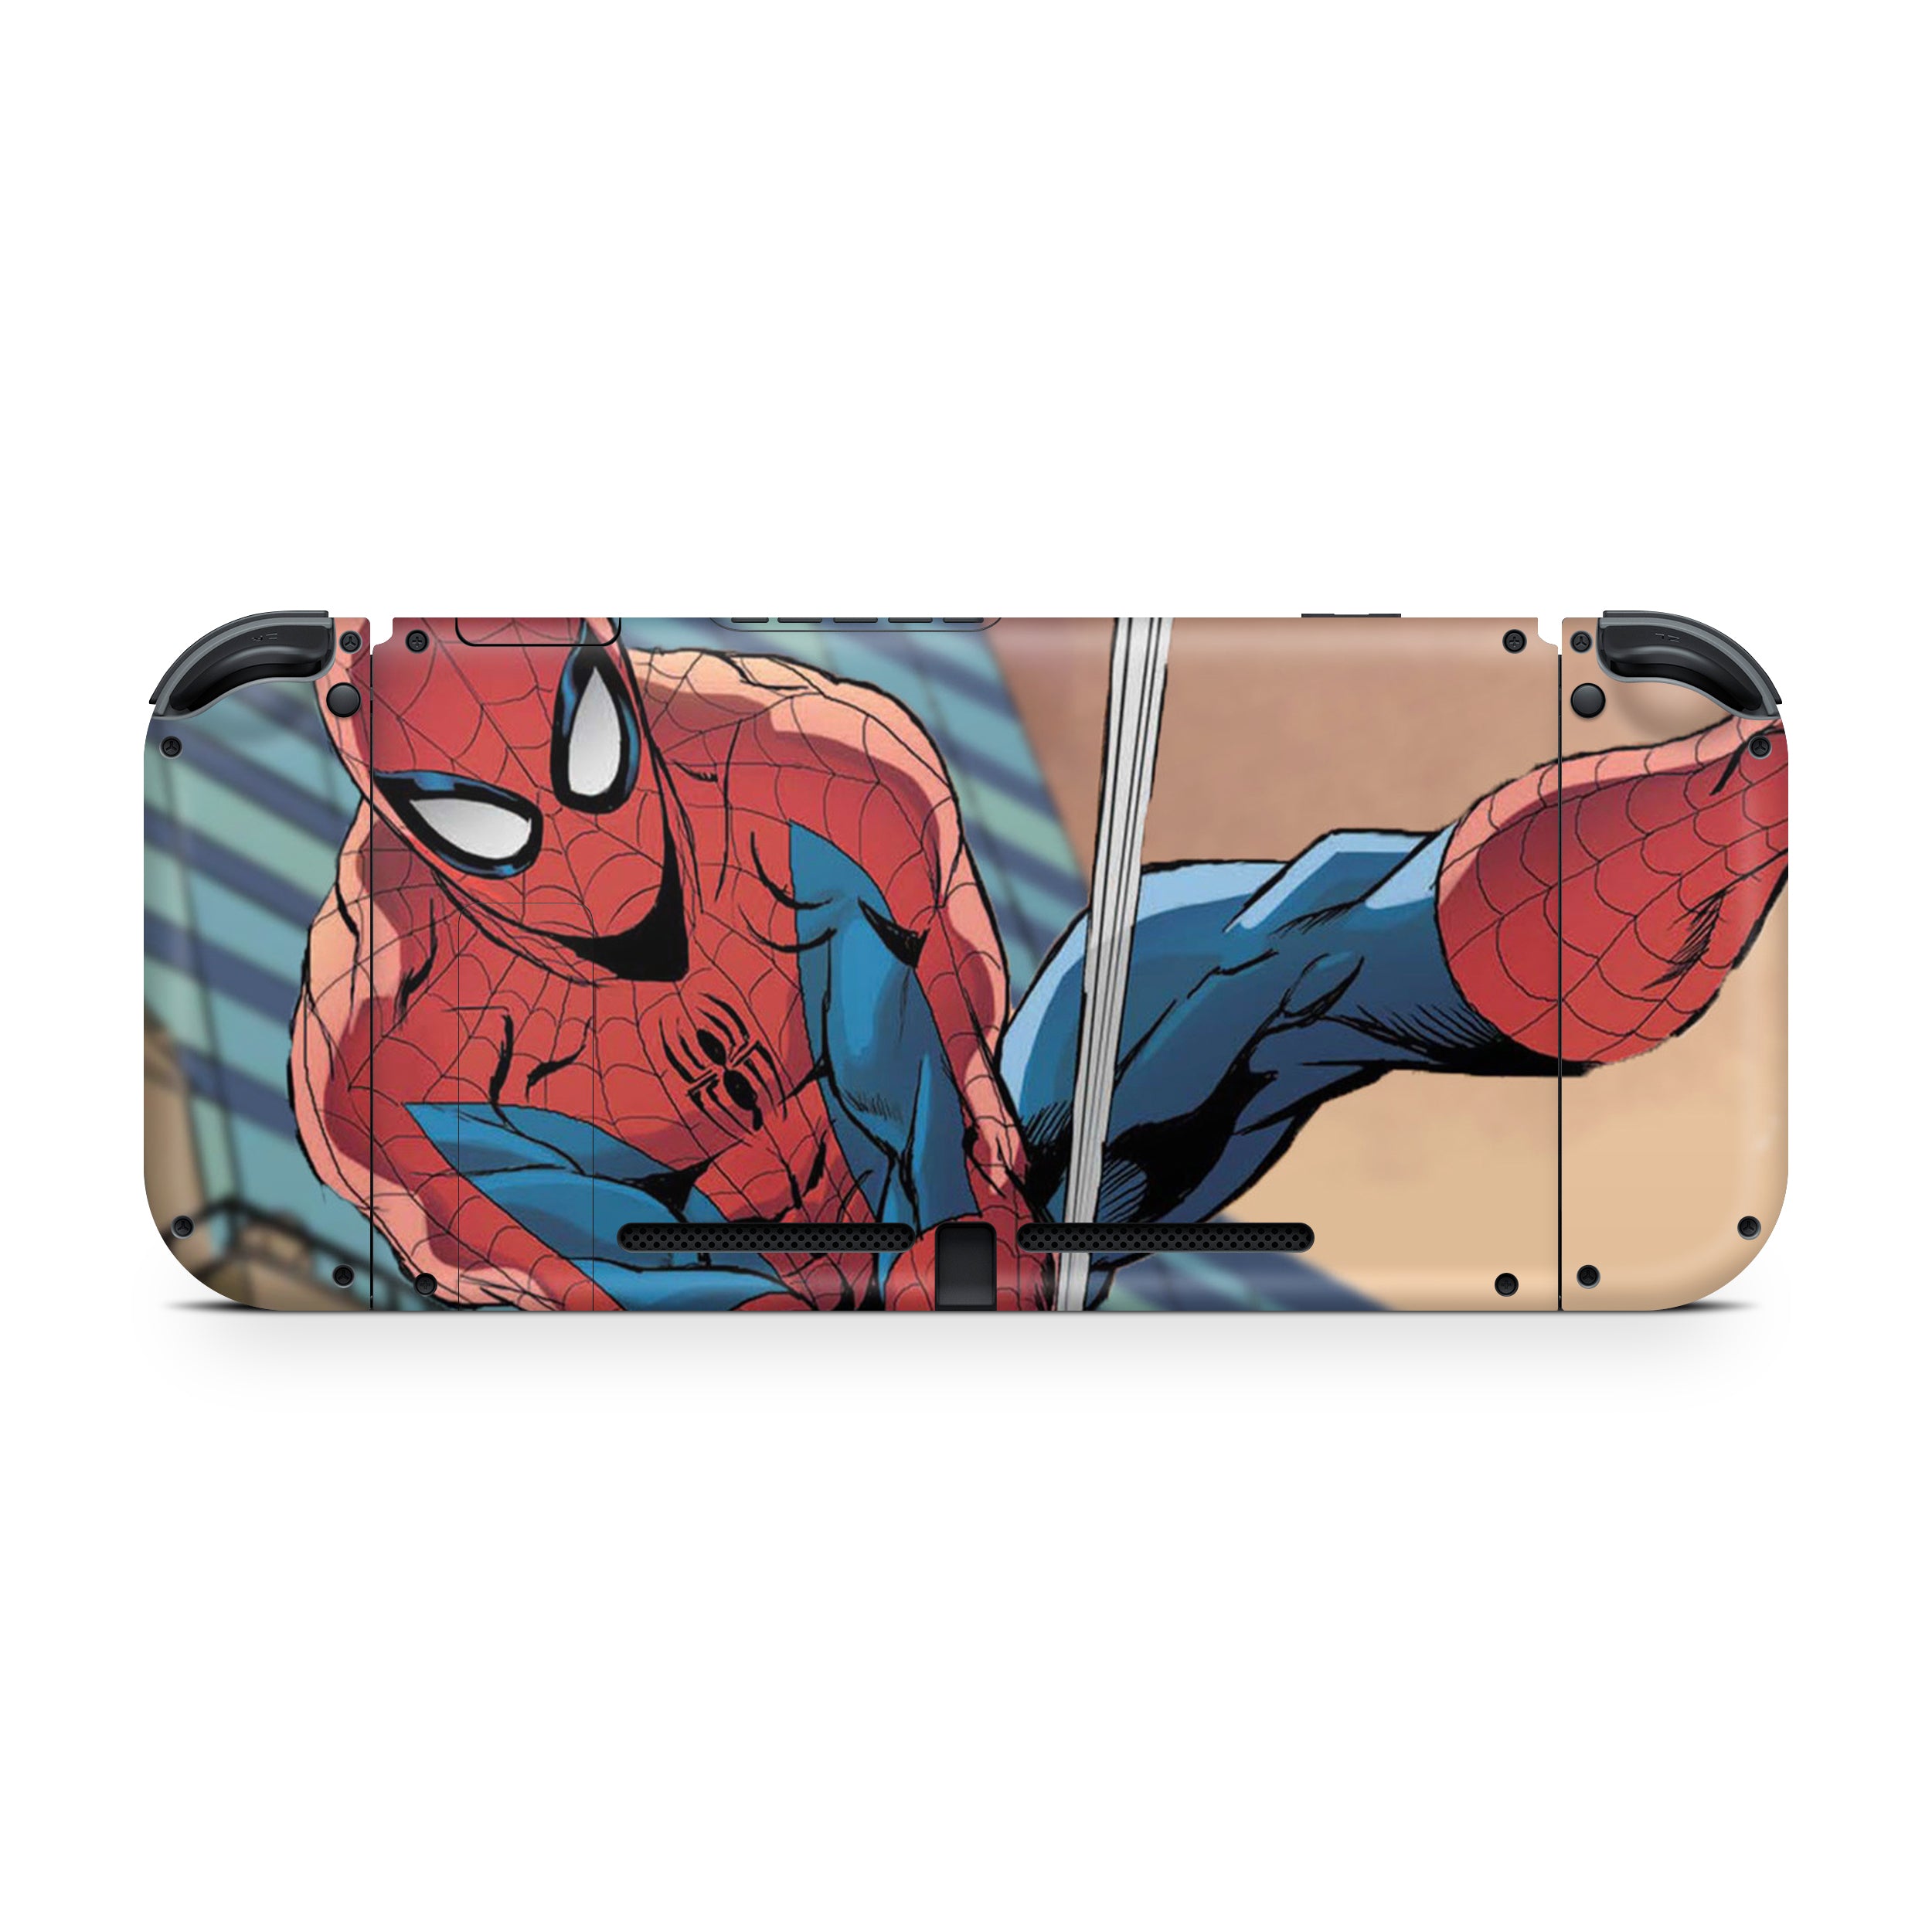 A video game skin featuring a Marvel Comics Spider Man design for the Nintendo Switch.